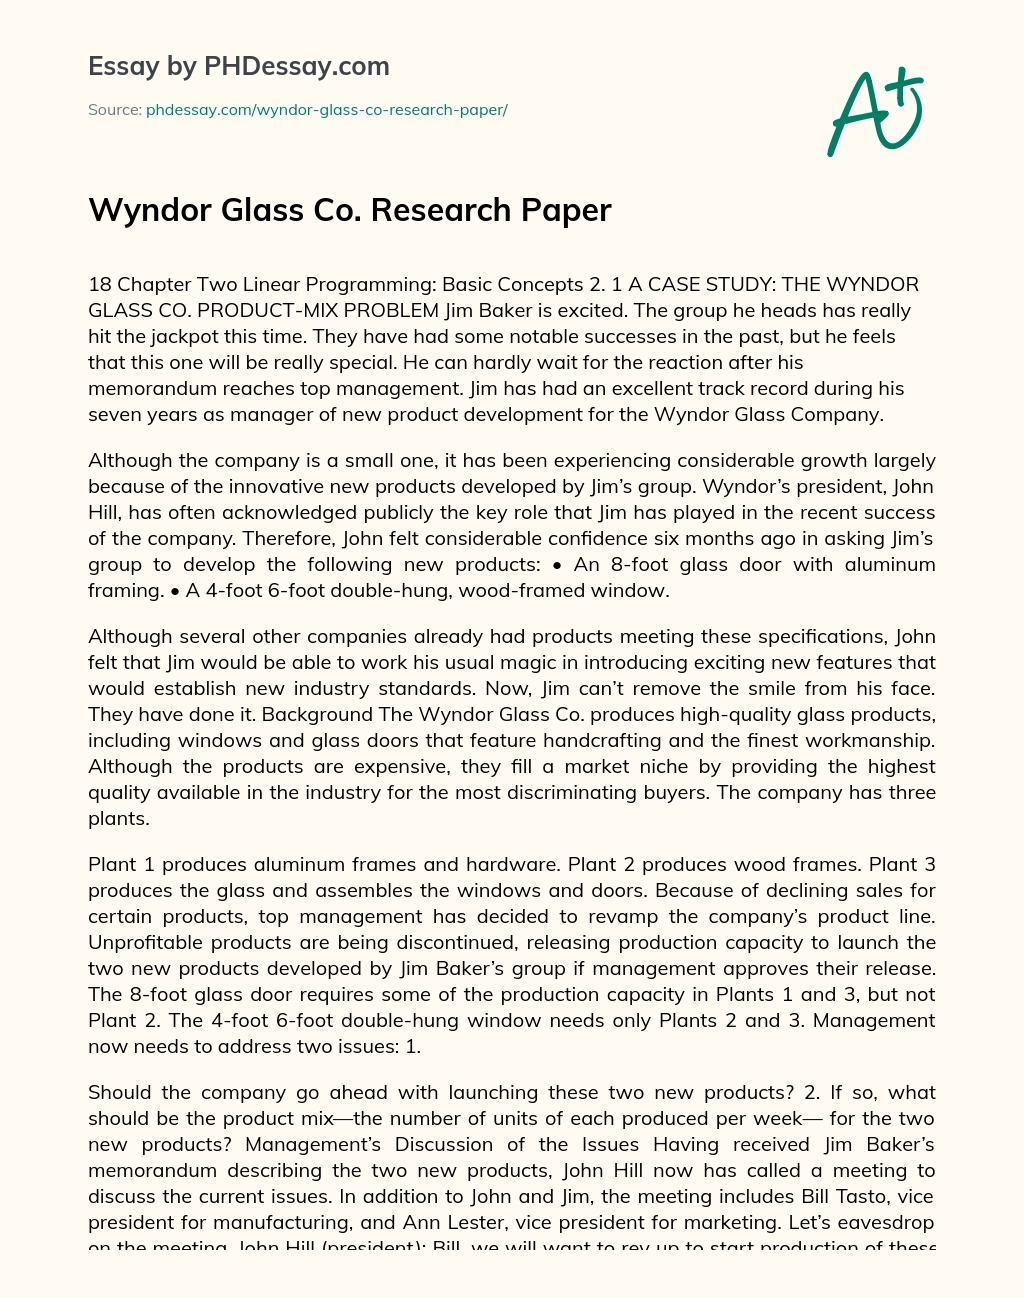 Wyndor Glass Co. Research Paper essay